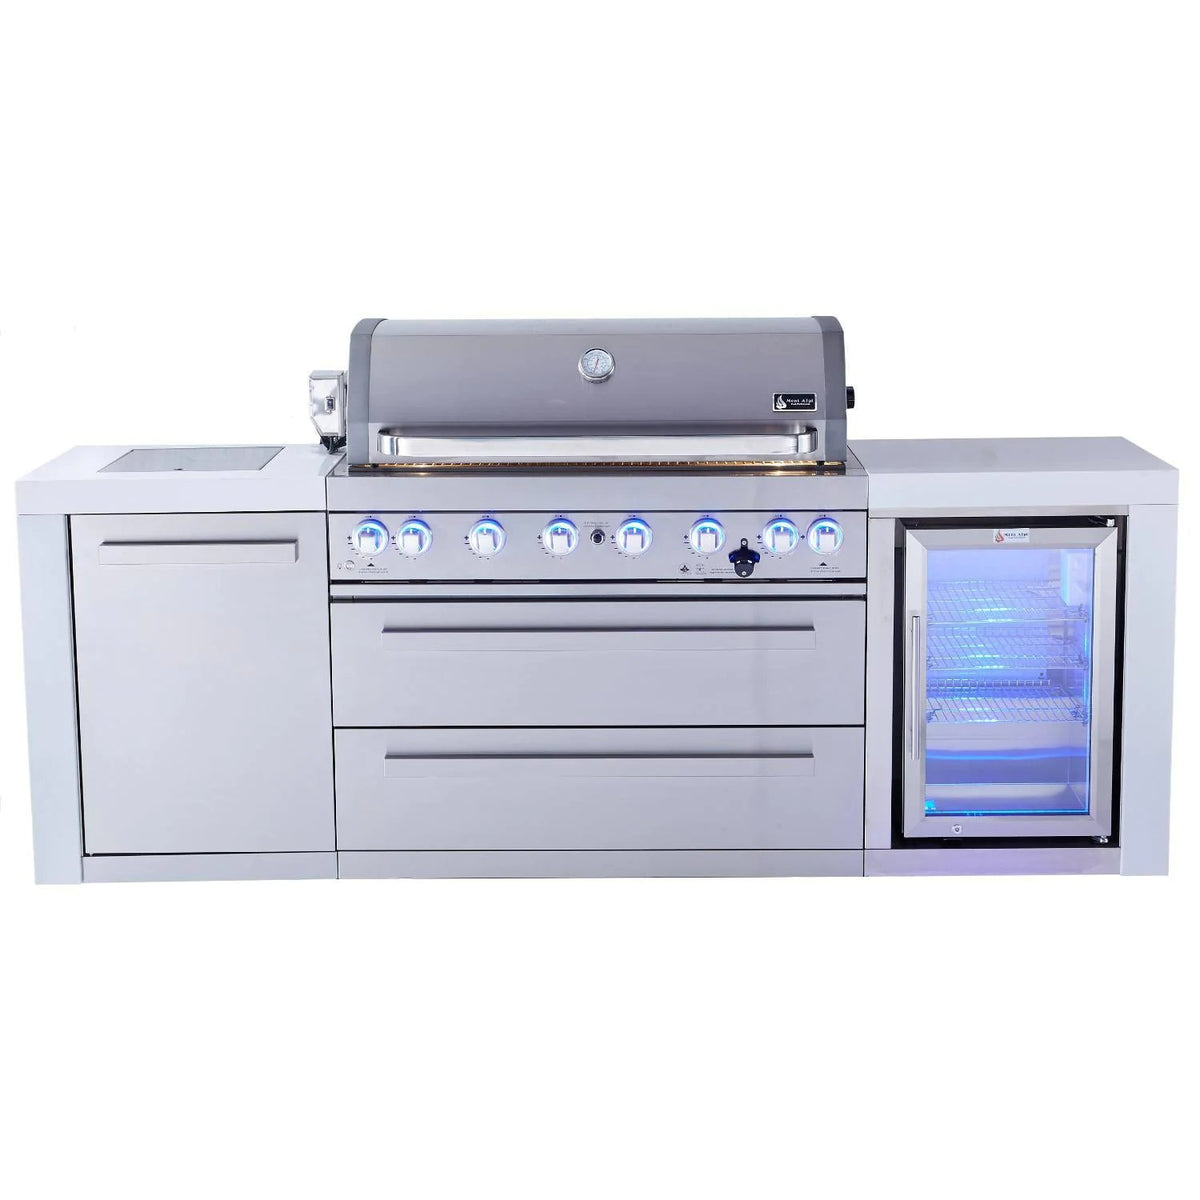 http://nycfireplaceshop.com/cdn/shop/products/mont-alpi-805-deluxe-gas-island-grill-w-refrigerator-cabinet-infrared-side-burner-rotisserie-kit-stainless-steel-585543_1200x1200.jpg?v=1682694870